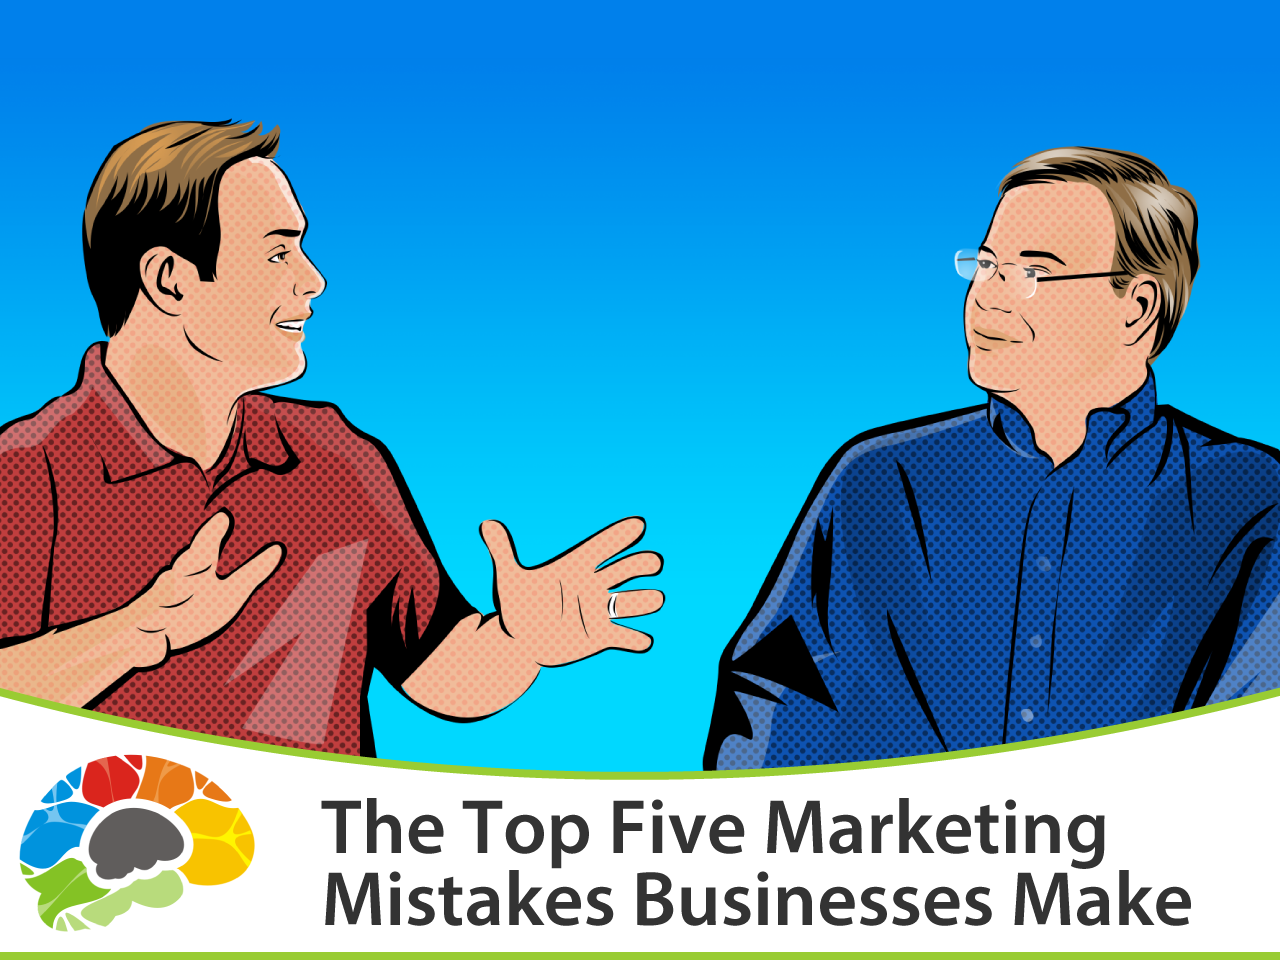 Entrepreneuring: Keys To Business Success + The Top 5 Marketing Mistakes, Singapore elarning online course